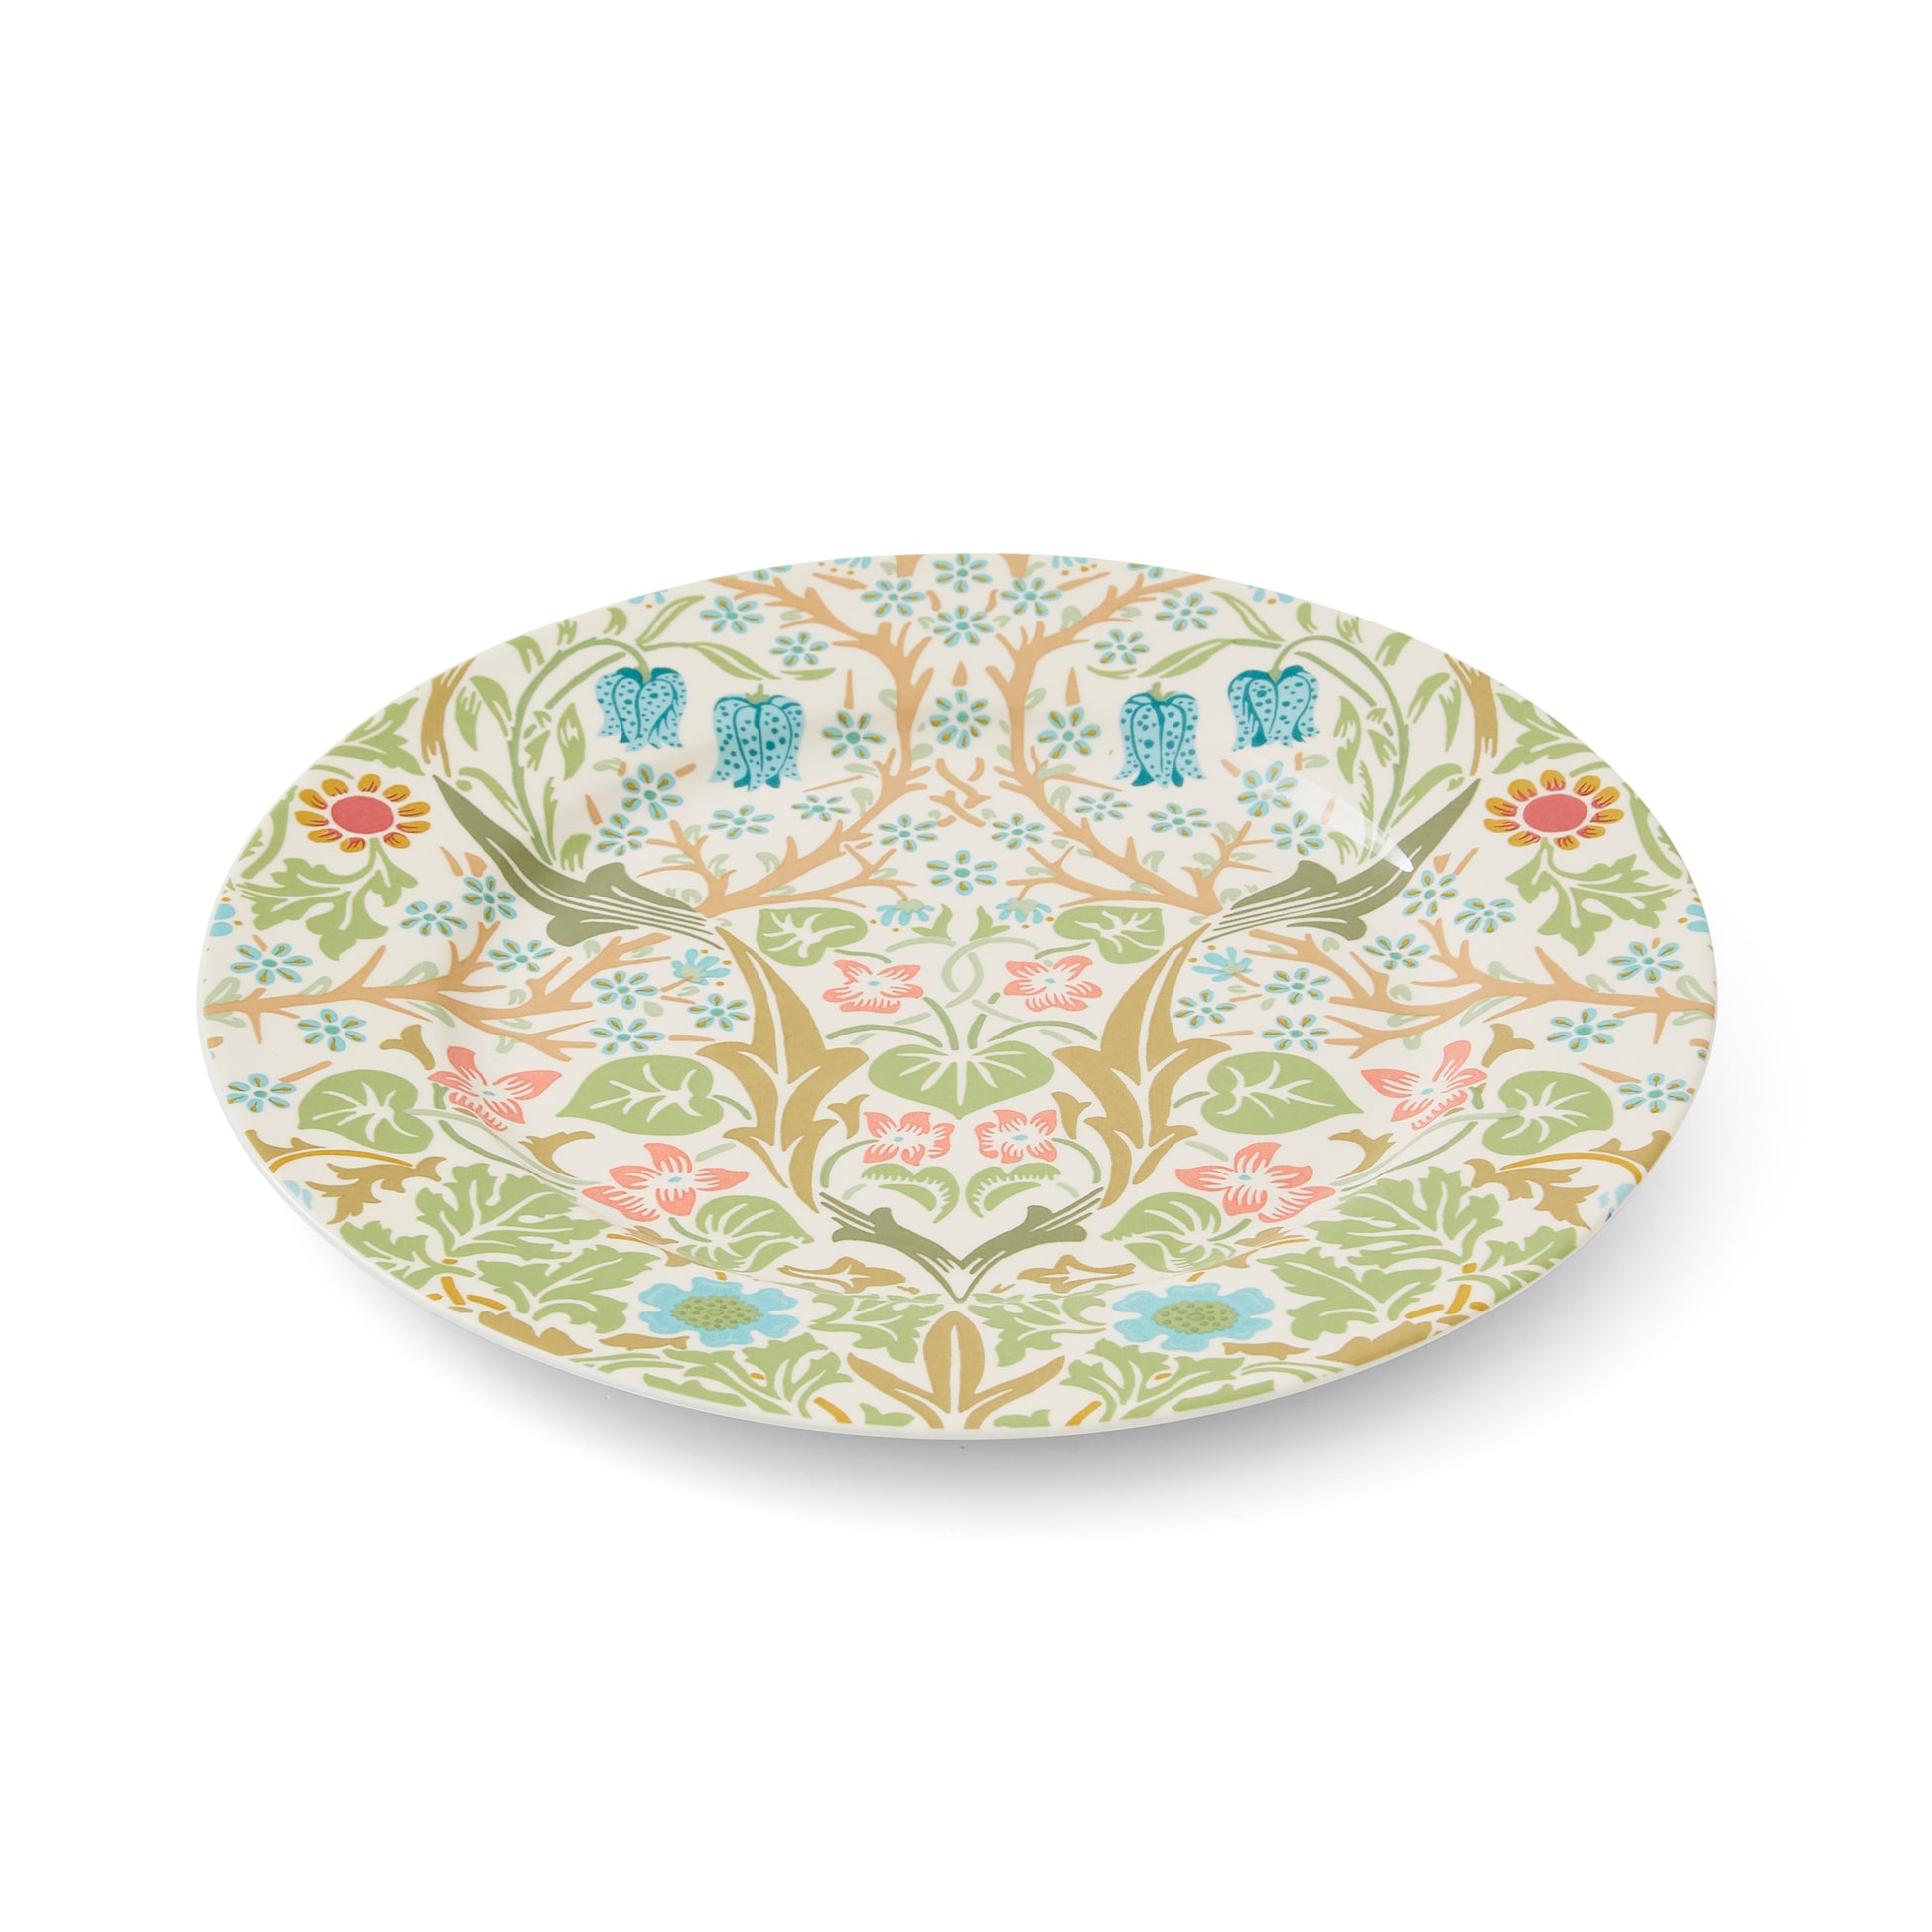 blackthorn  patterned dessert plate against a white background